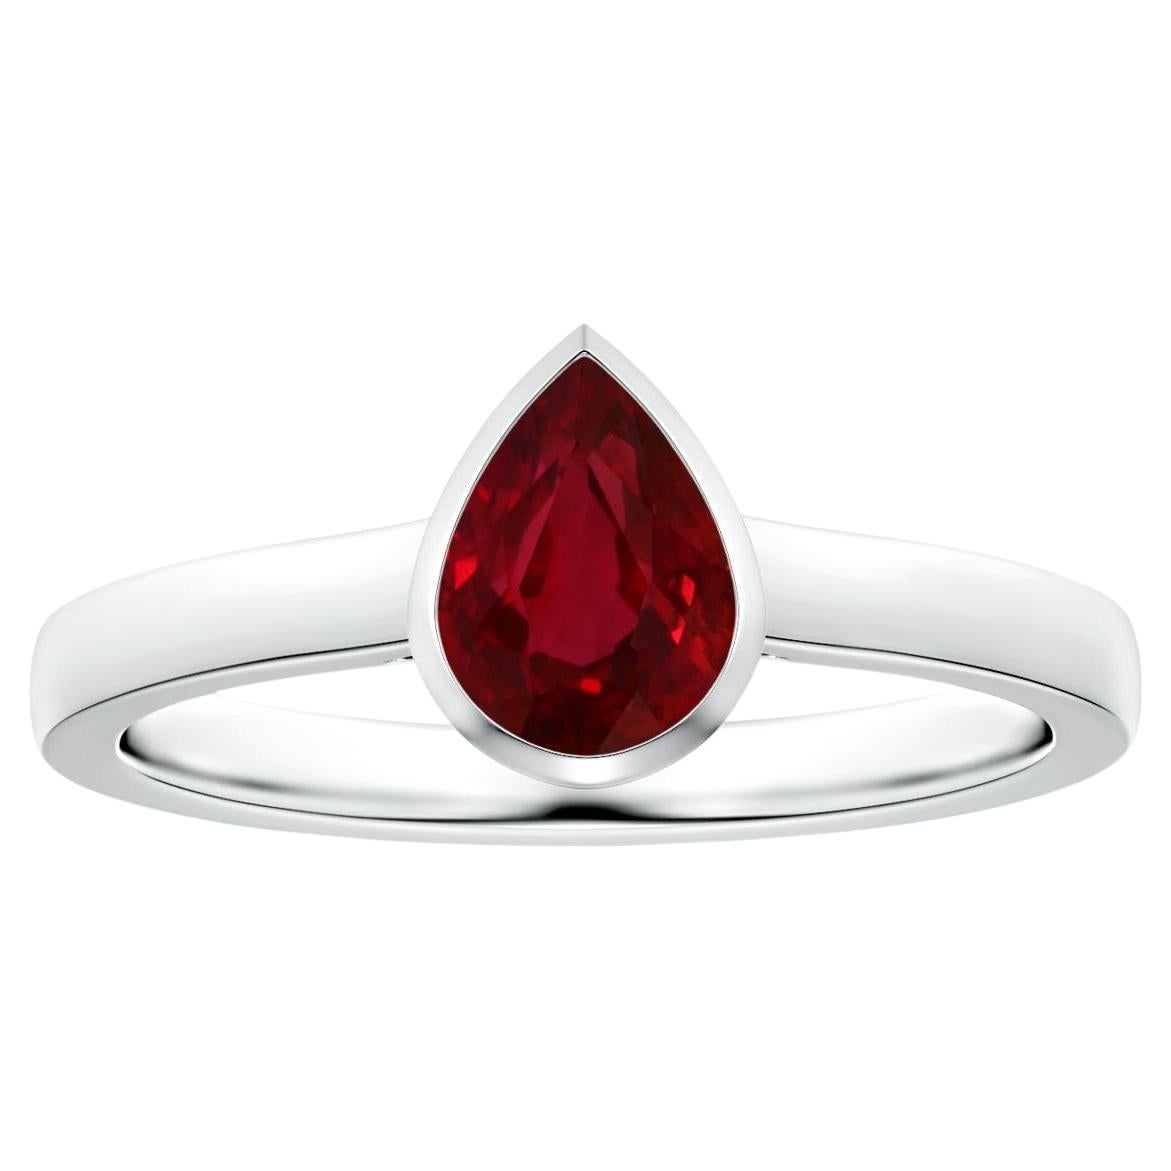 For Sale:  ANGARA Bezel-Set GIA Certified Pear-Shaped Ruby Solitaire Ring in White Gold